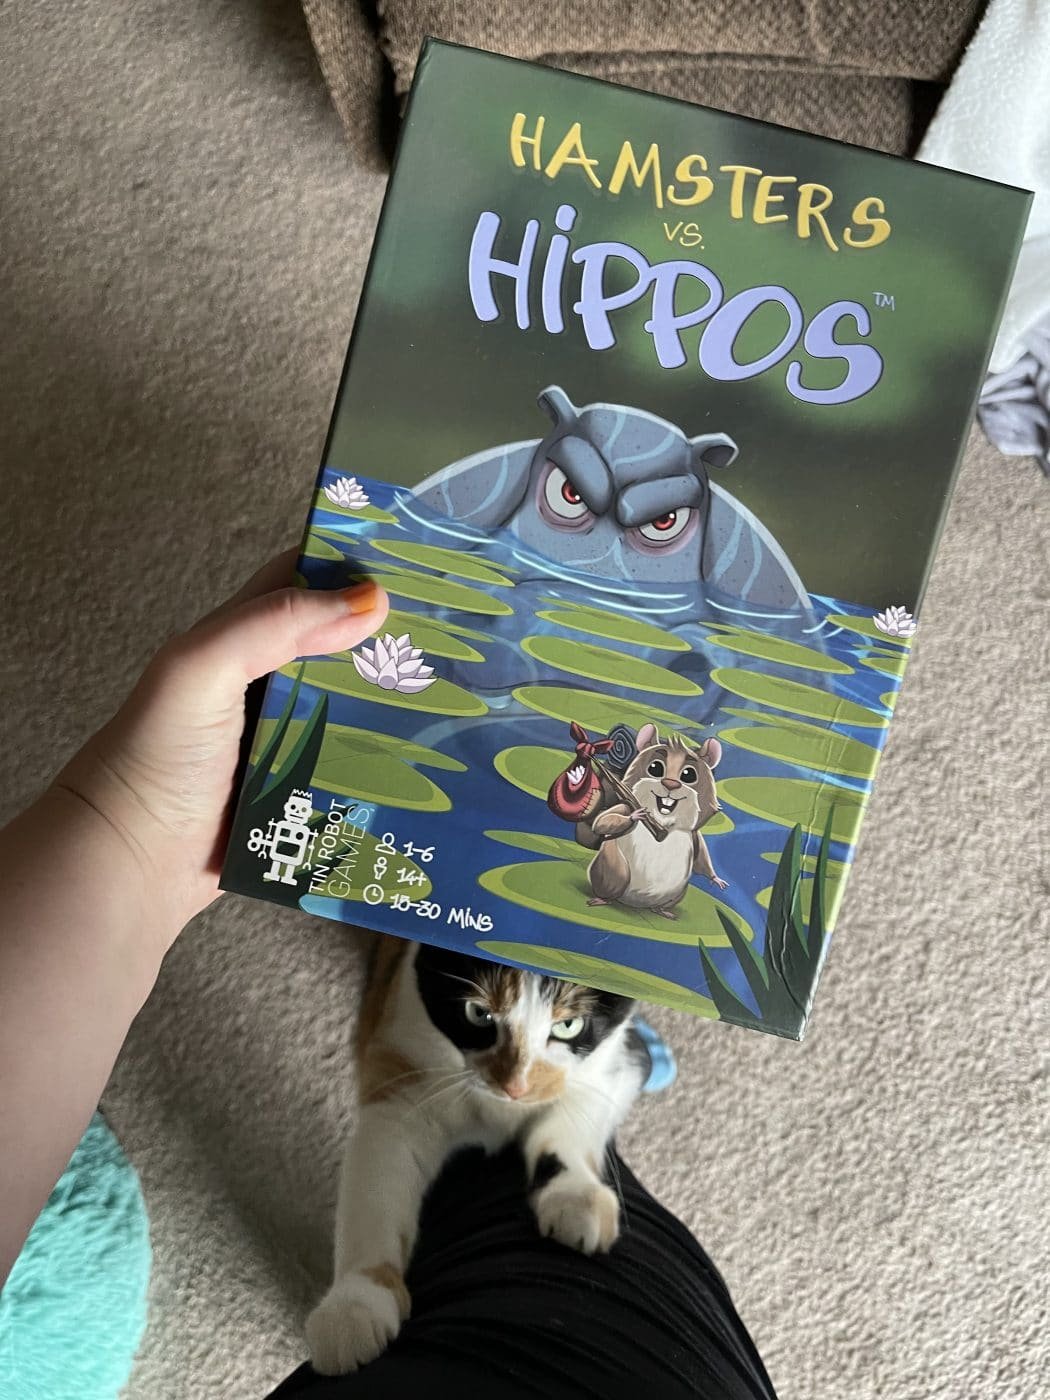 Lily with hamsters vs hippos